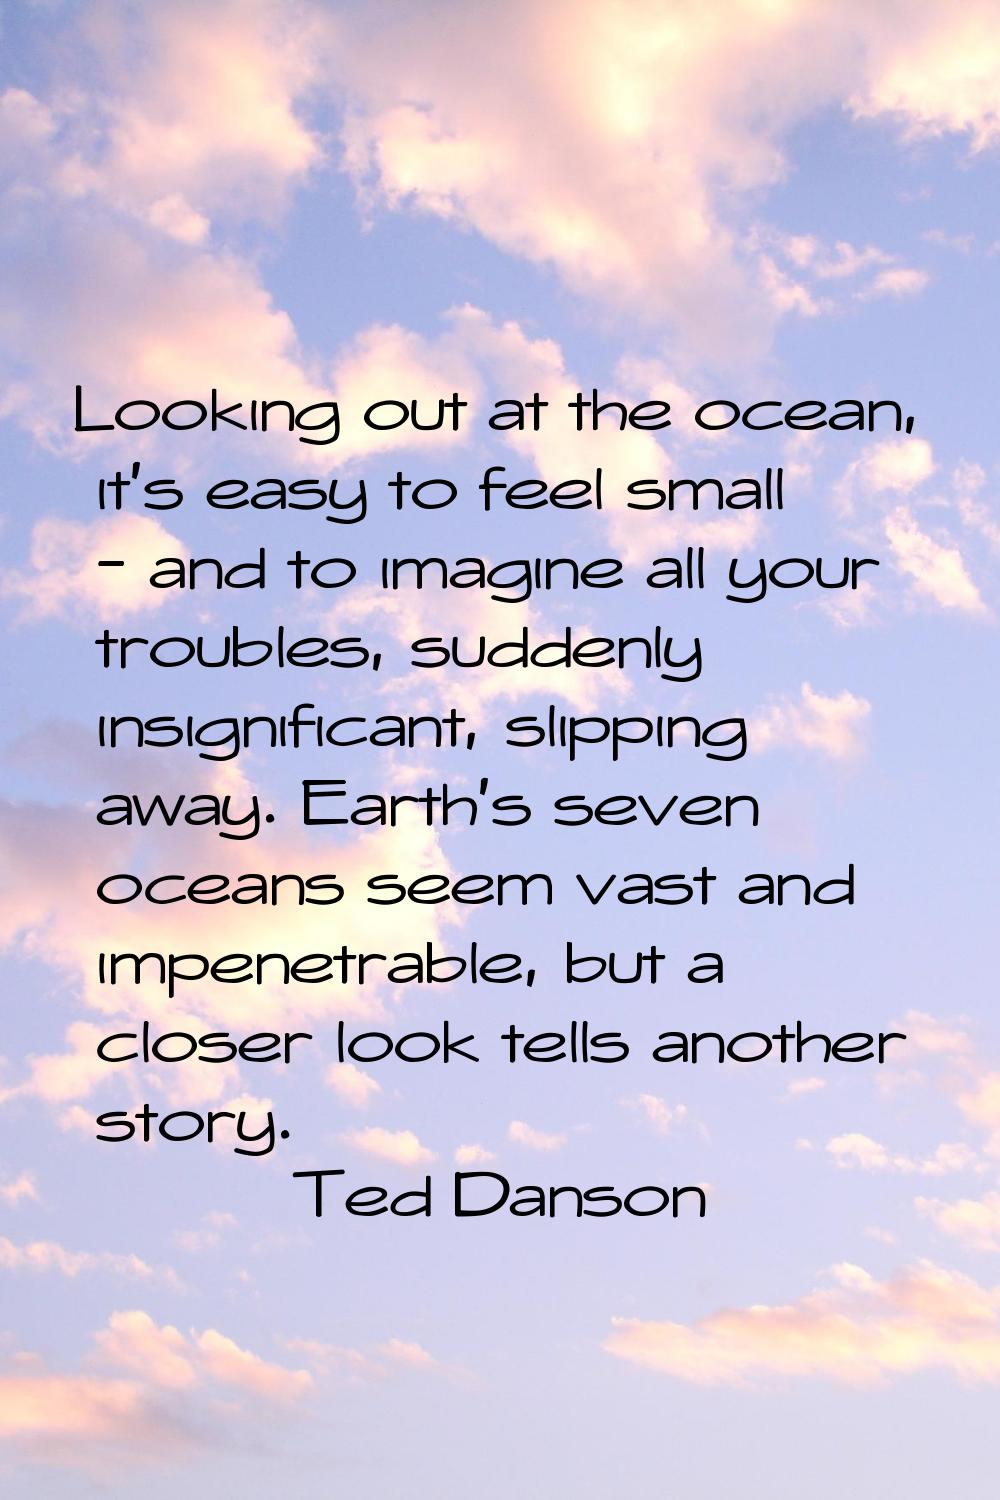 Looking out at the ocean, it's easy to feel small - and to imagine all your troubles, suddenly insi